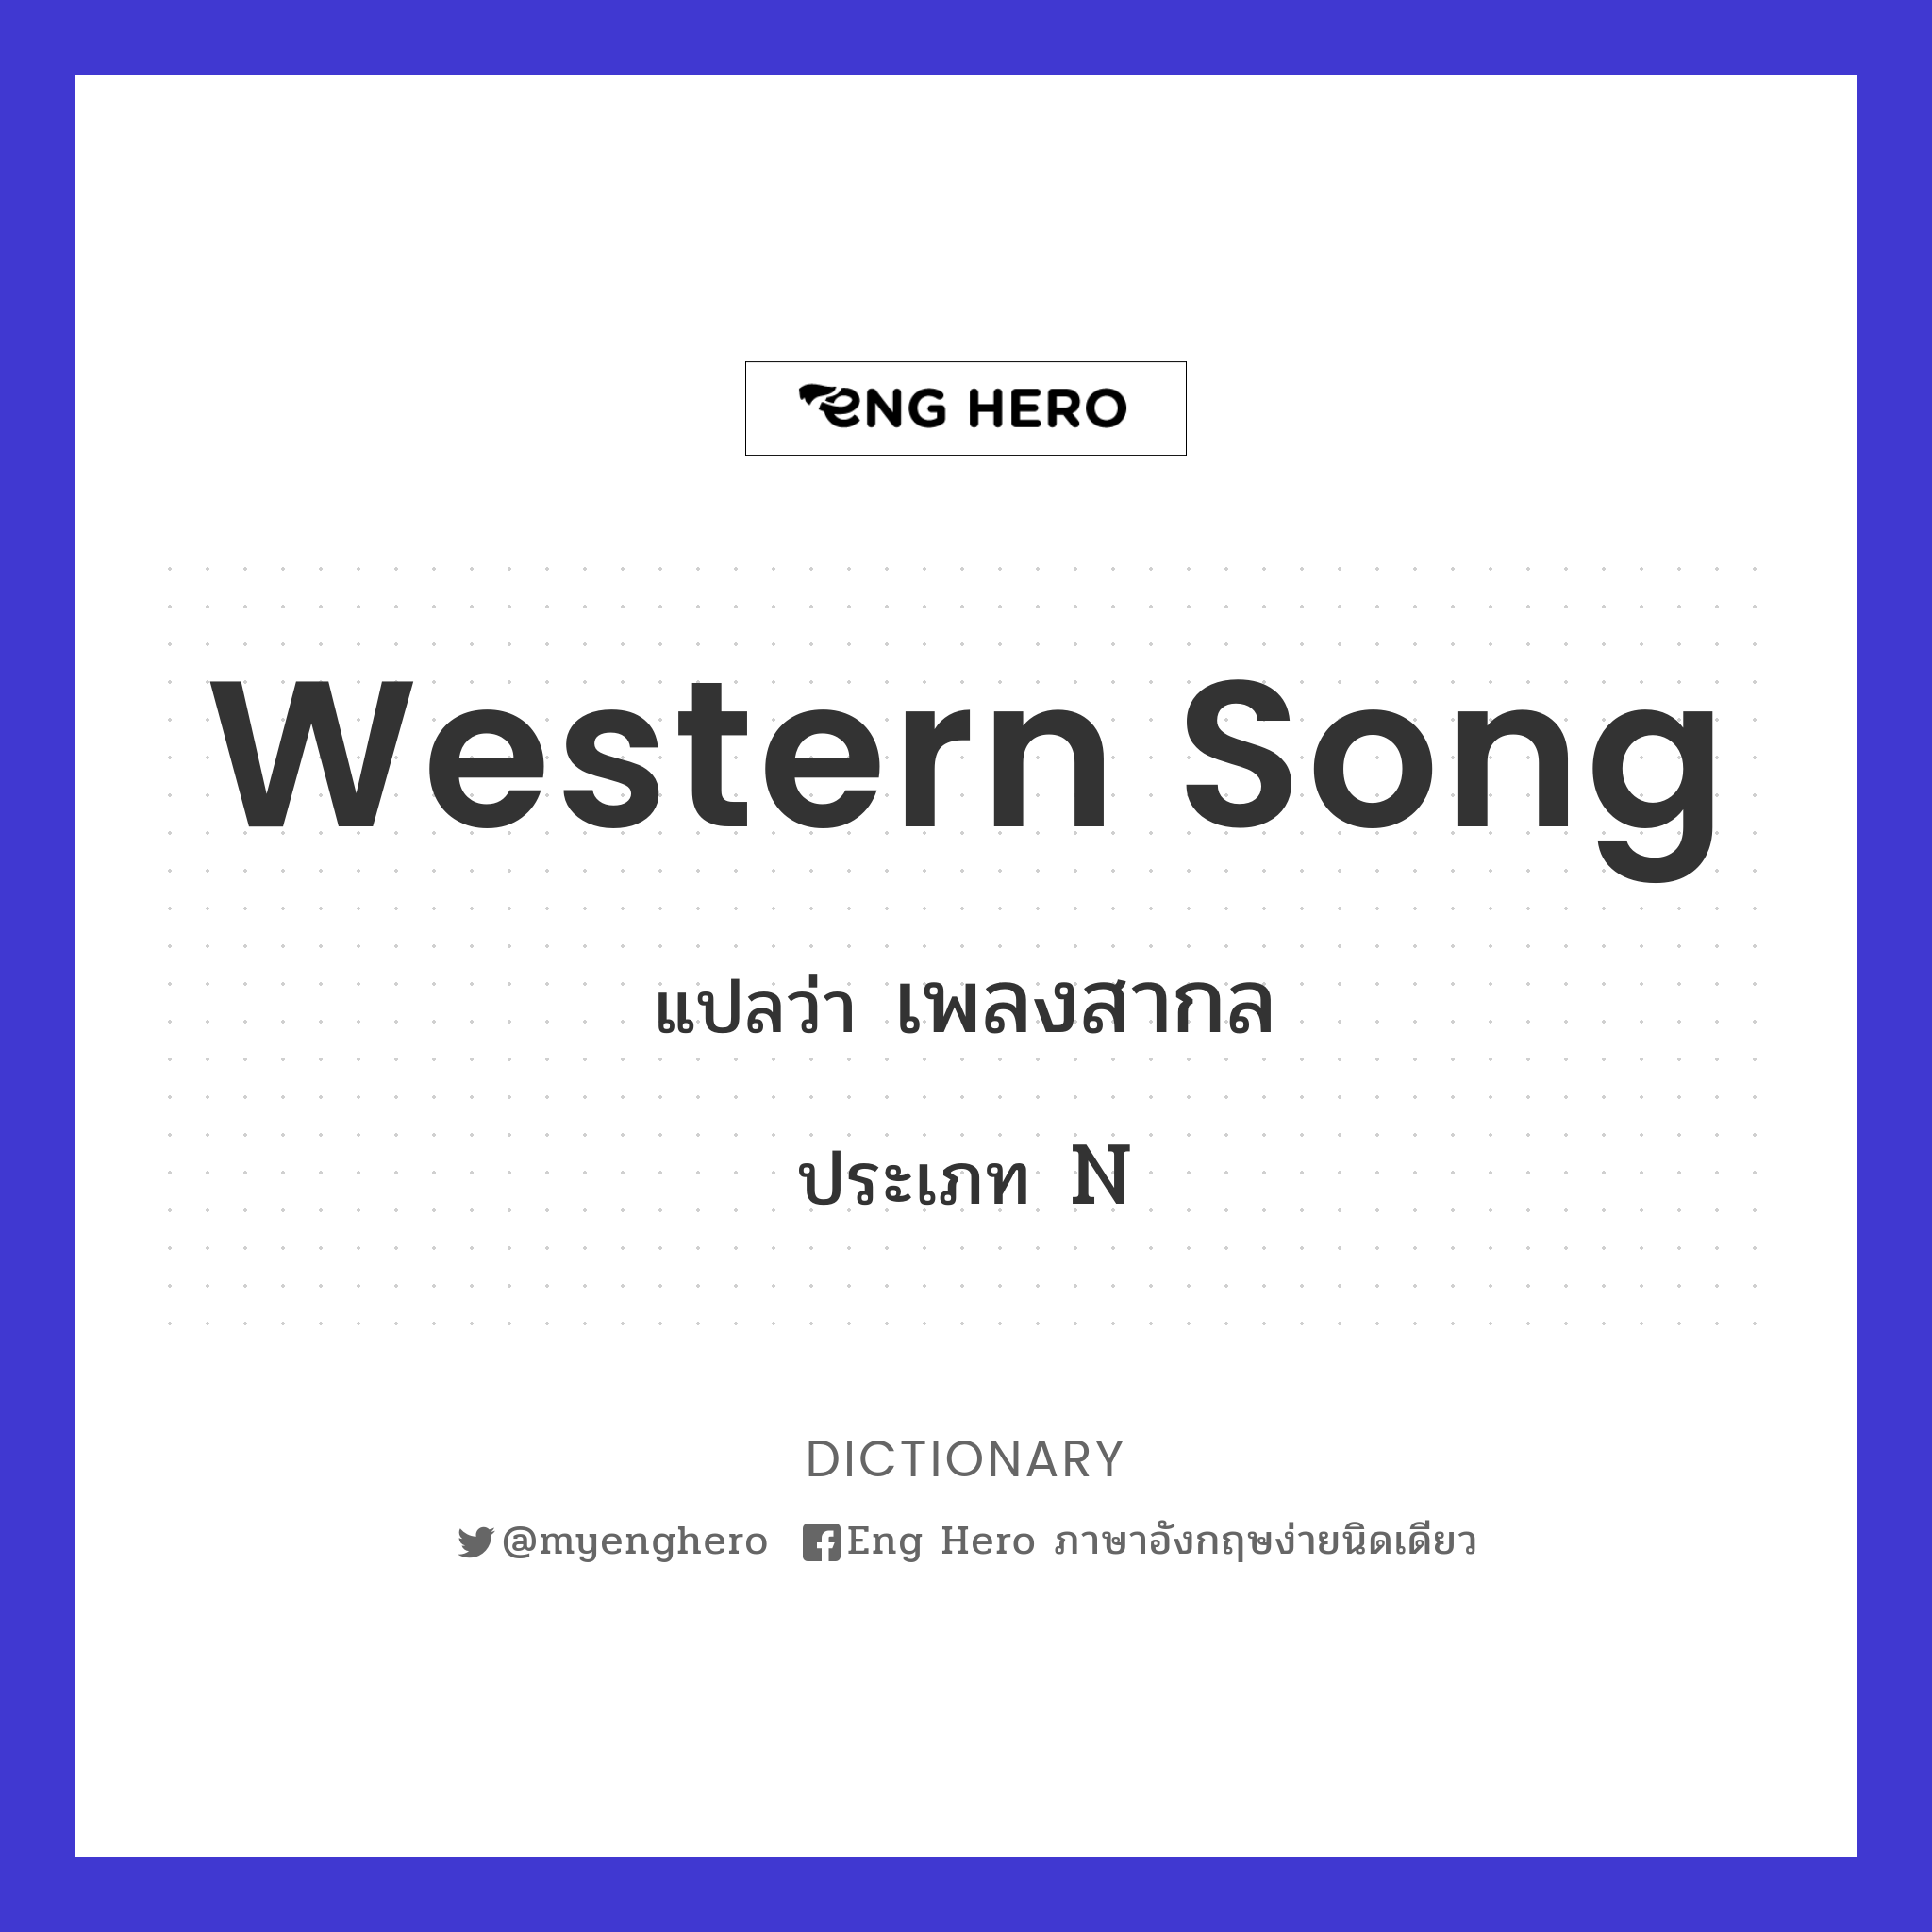 Western song